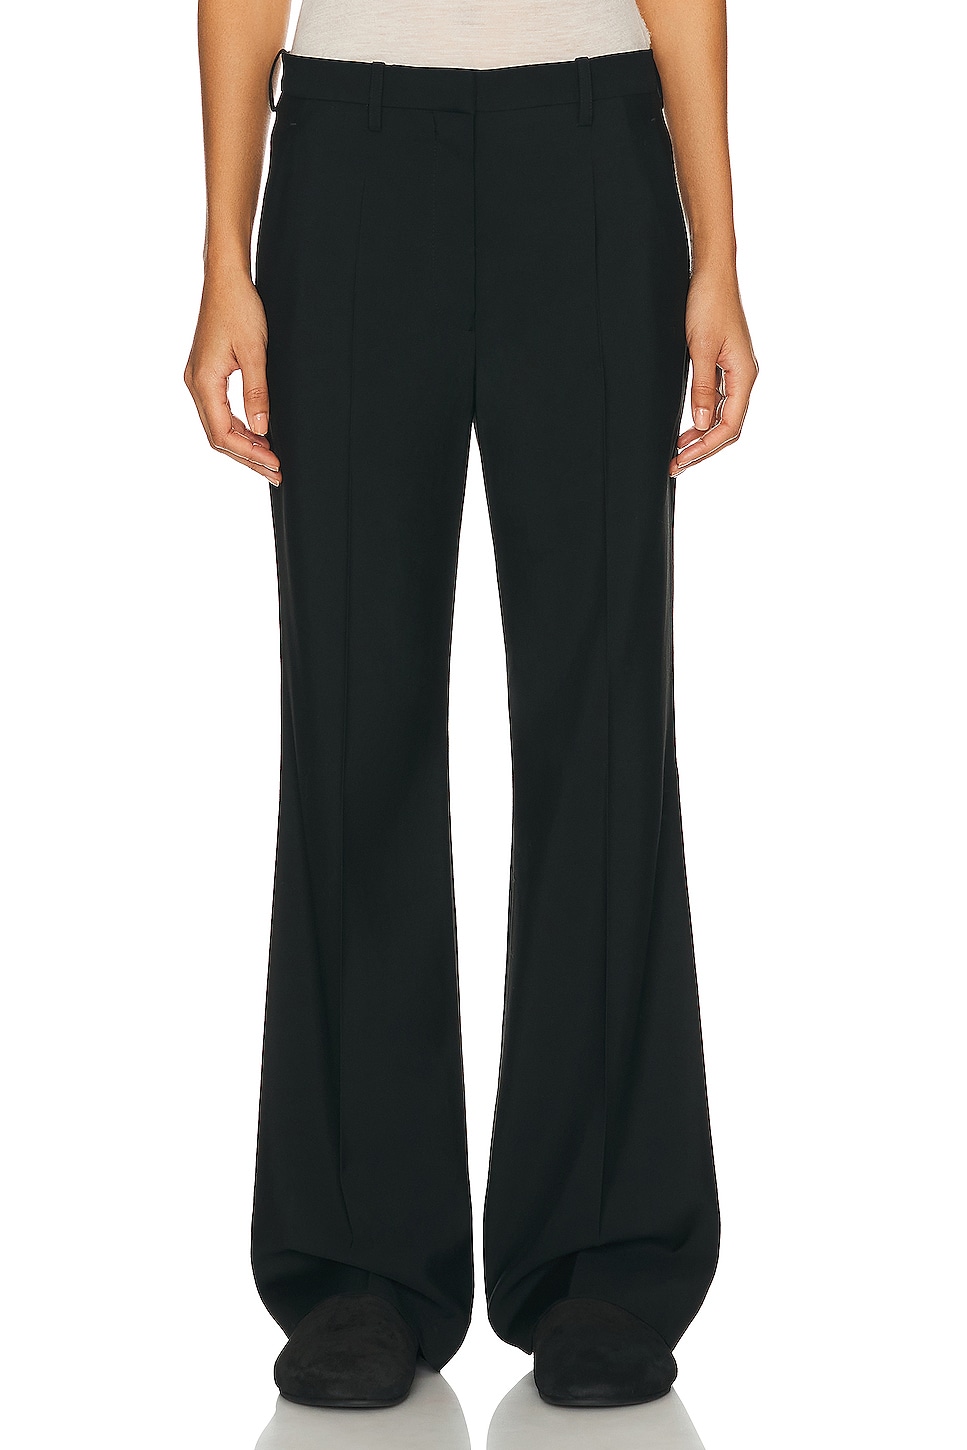 Image 1 of The Row Gandal Pant in BLACK